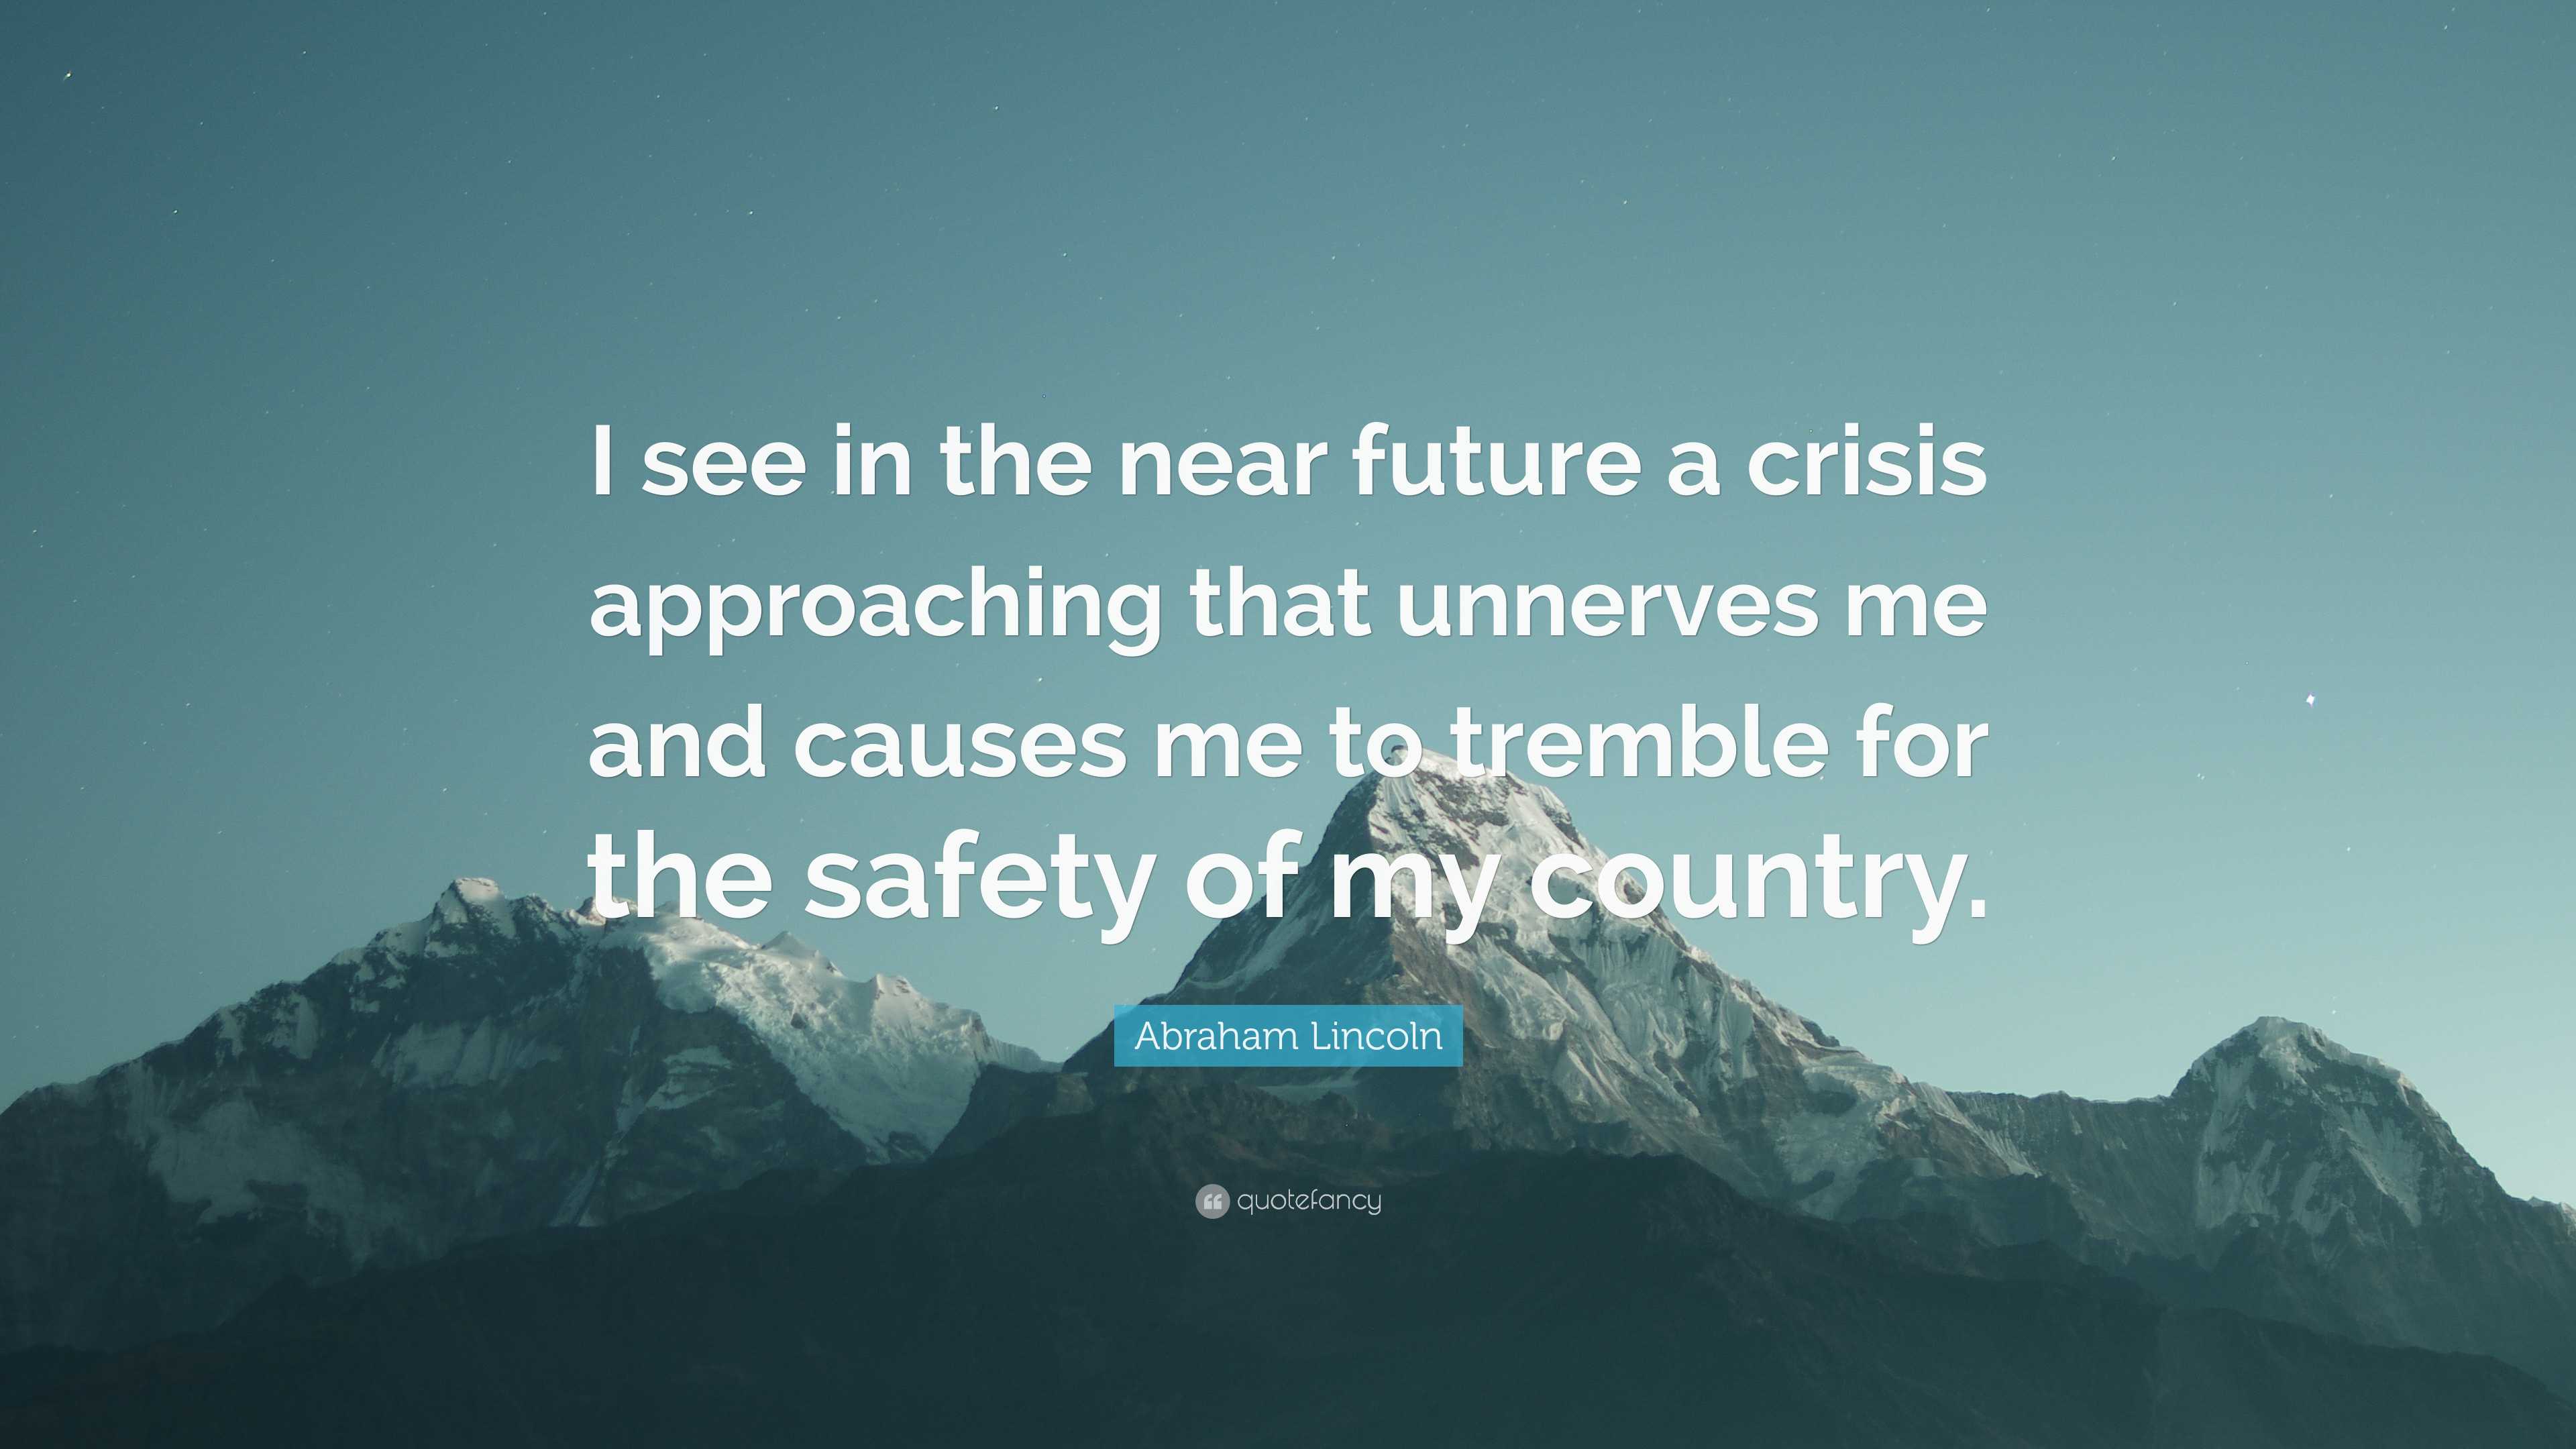 Abraham Lincoln Quote: “I see in the near future a crisis approaching that unnerves  me and